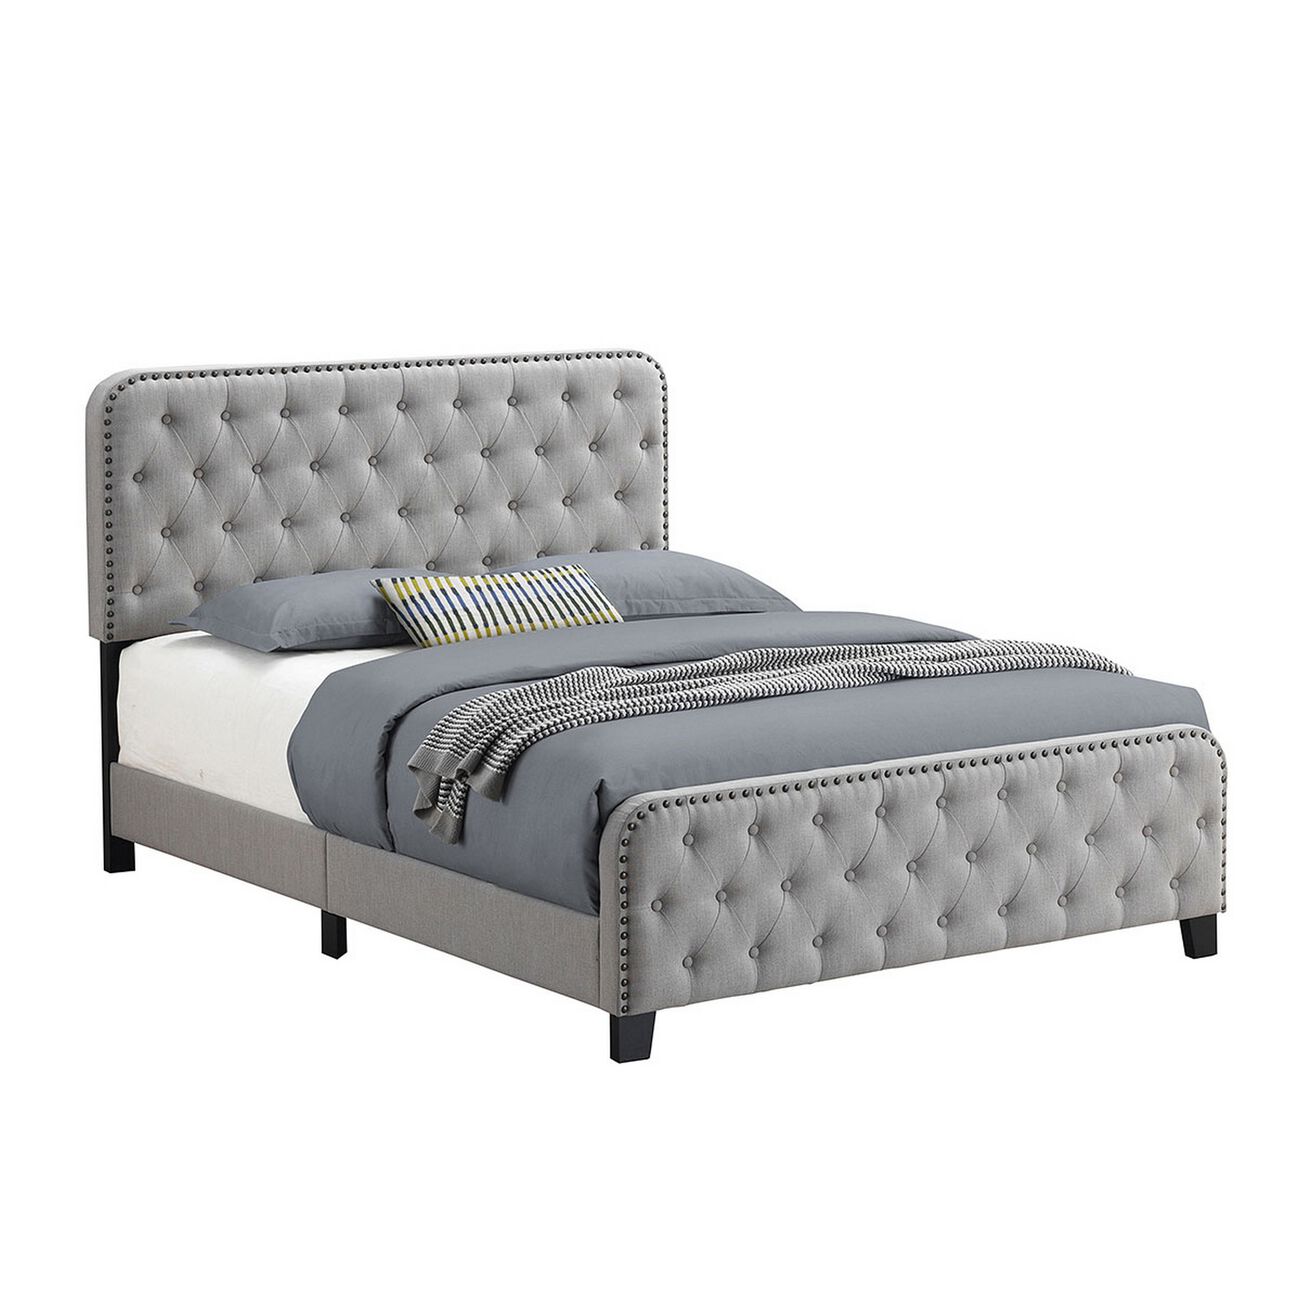 Tufted Eastern King Fabric Bed with Nailhead Trim, Gray